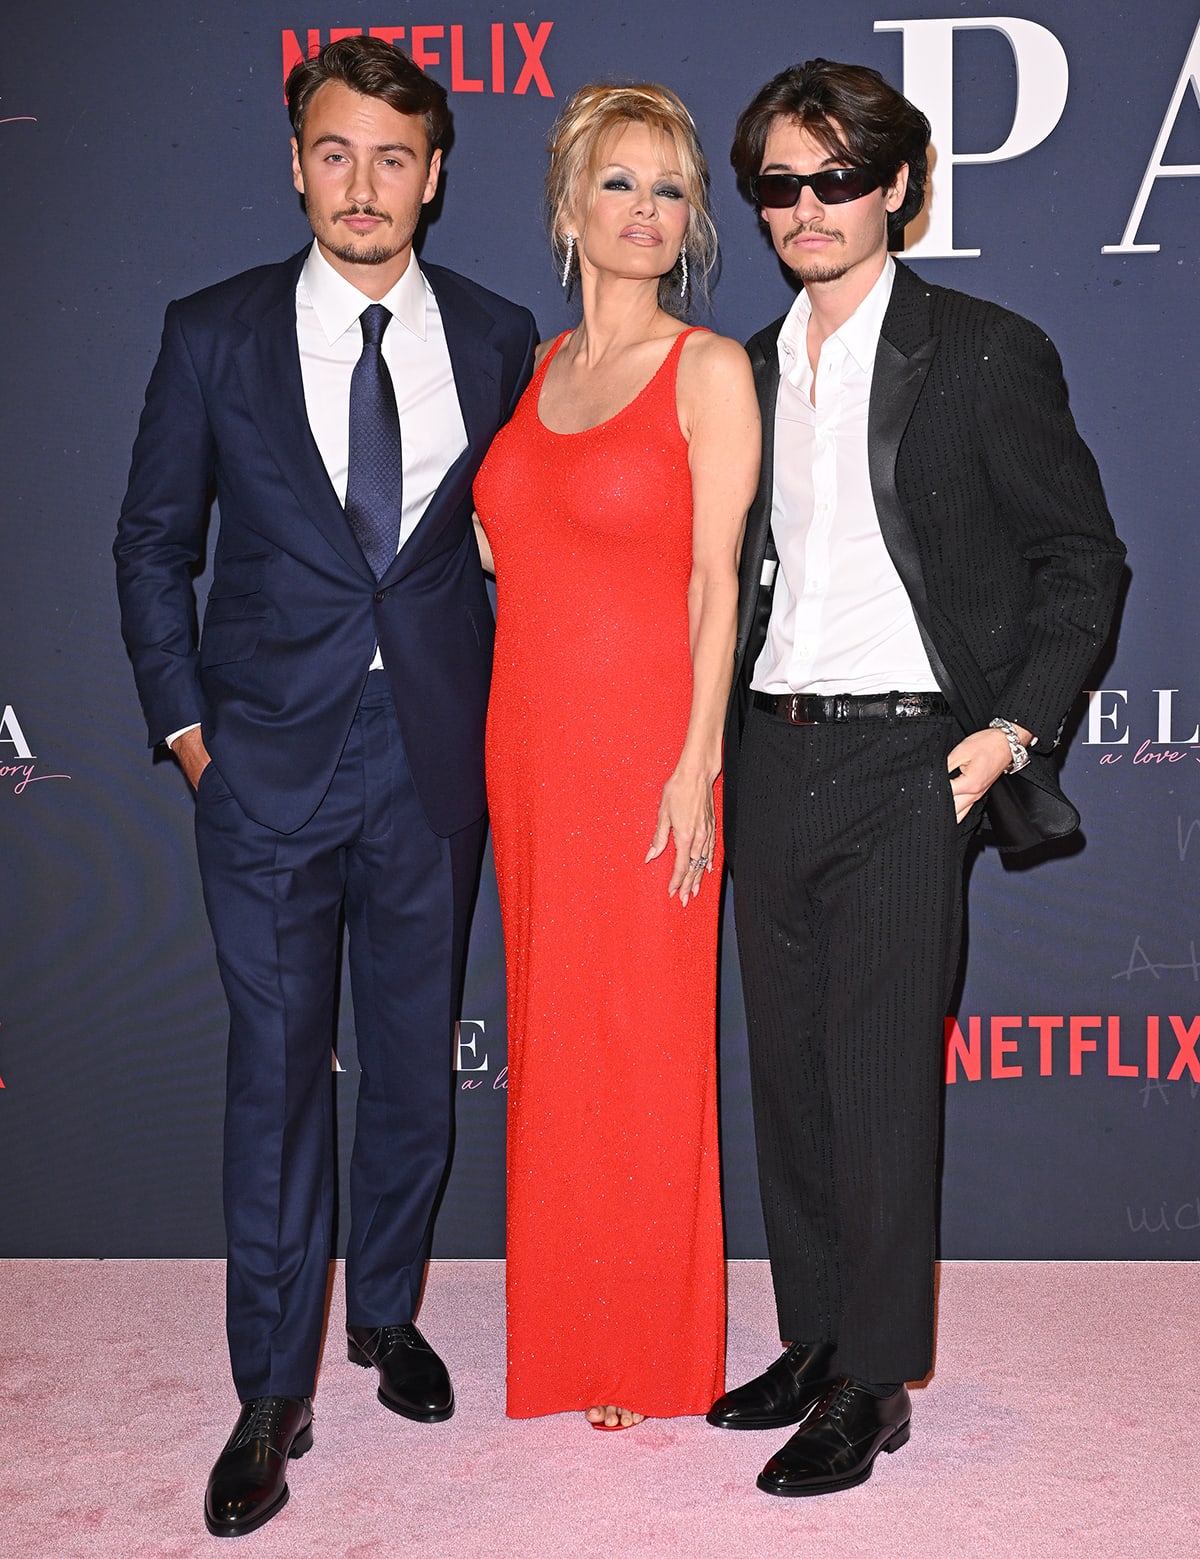 Pamela Anderson is joined on the red carpet by her sons Brandon Thomas and Dylan Jagger, whom she shares with her first husband Tommy Lee